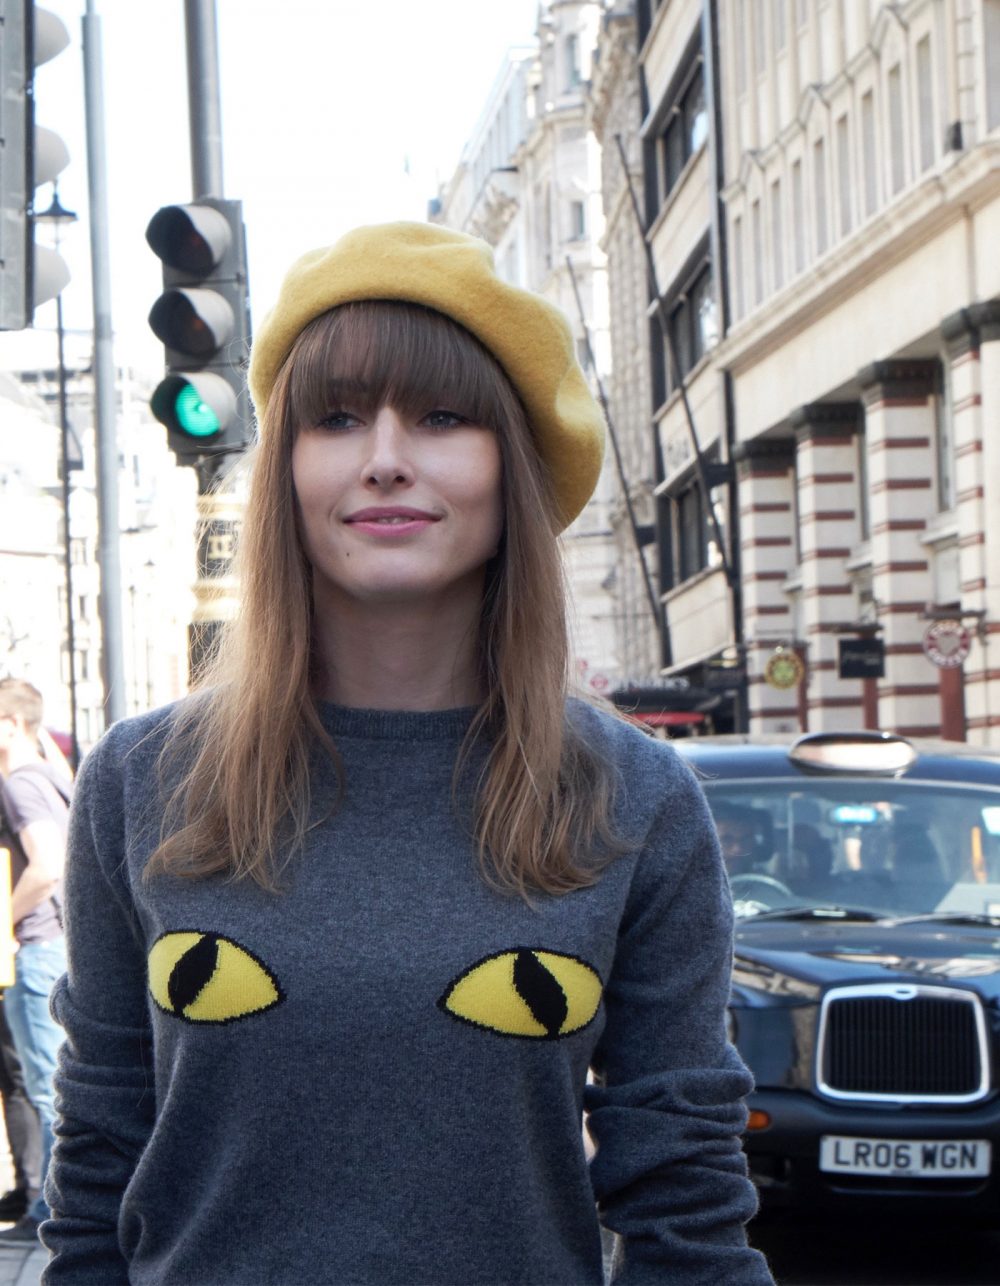 Woman on a busy London street, wearing a cashmere jumper with cat eyes knitted into the design.